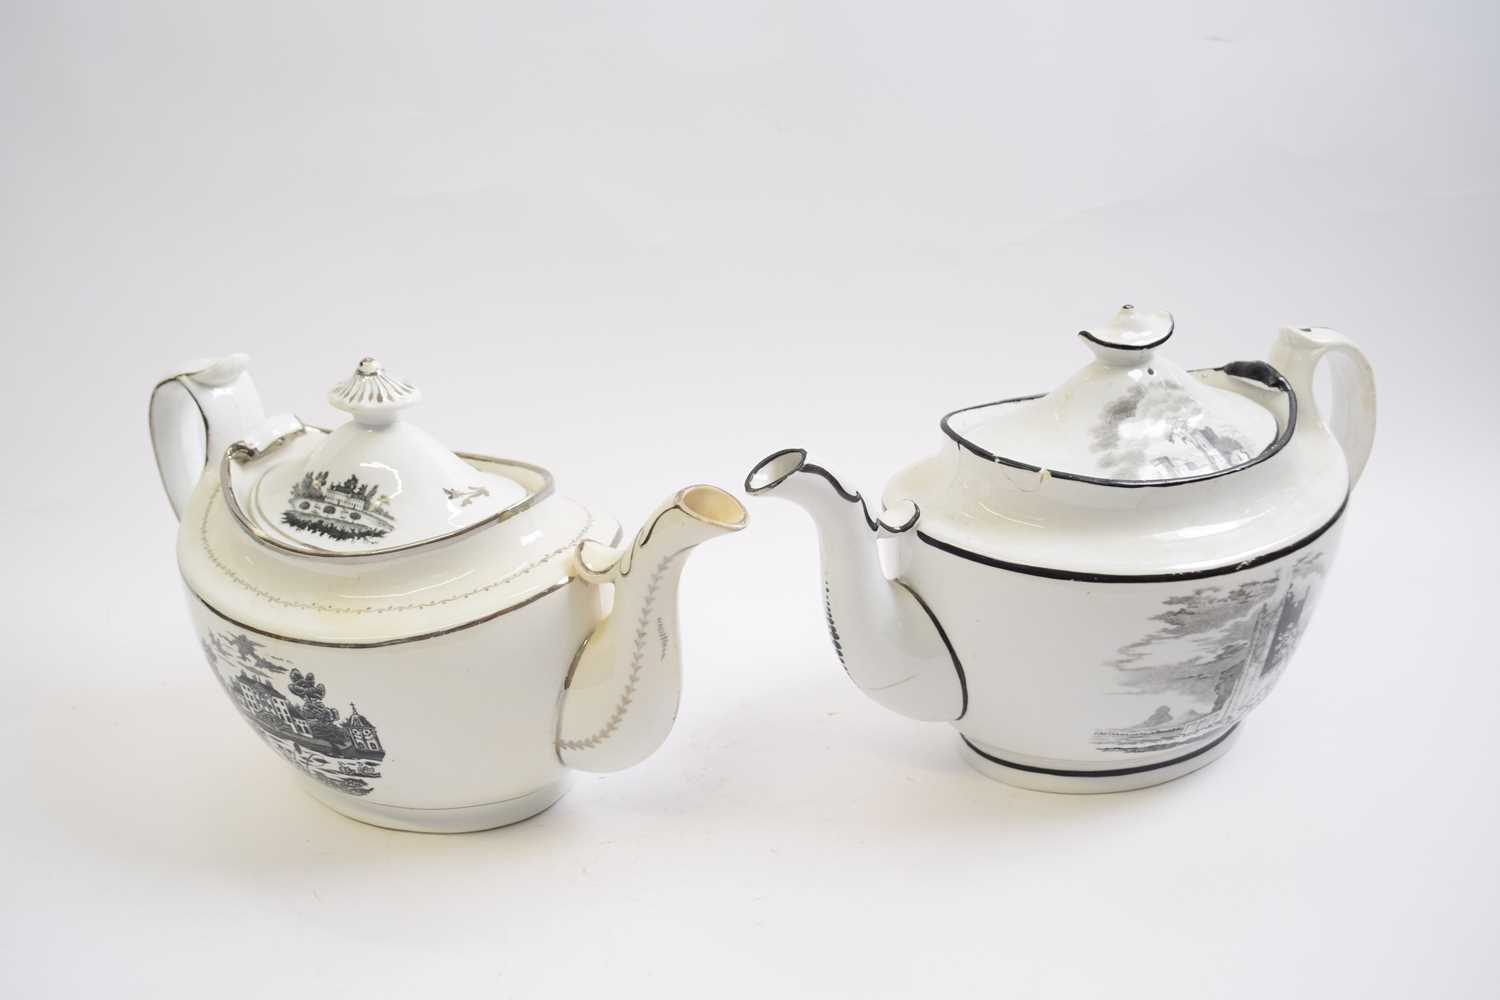 Two early 19th Century English porcelain teapots decorated with black printed scenes